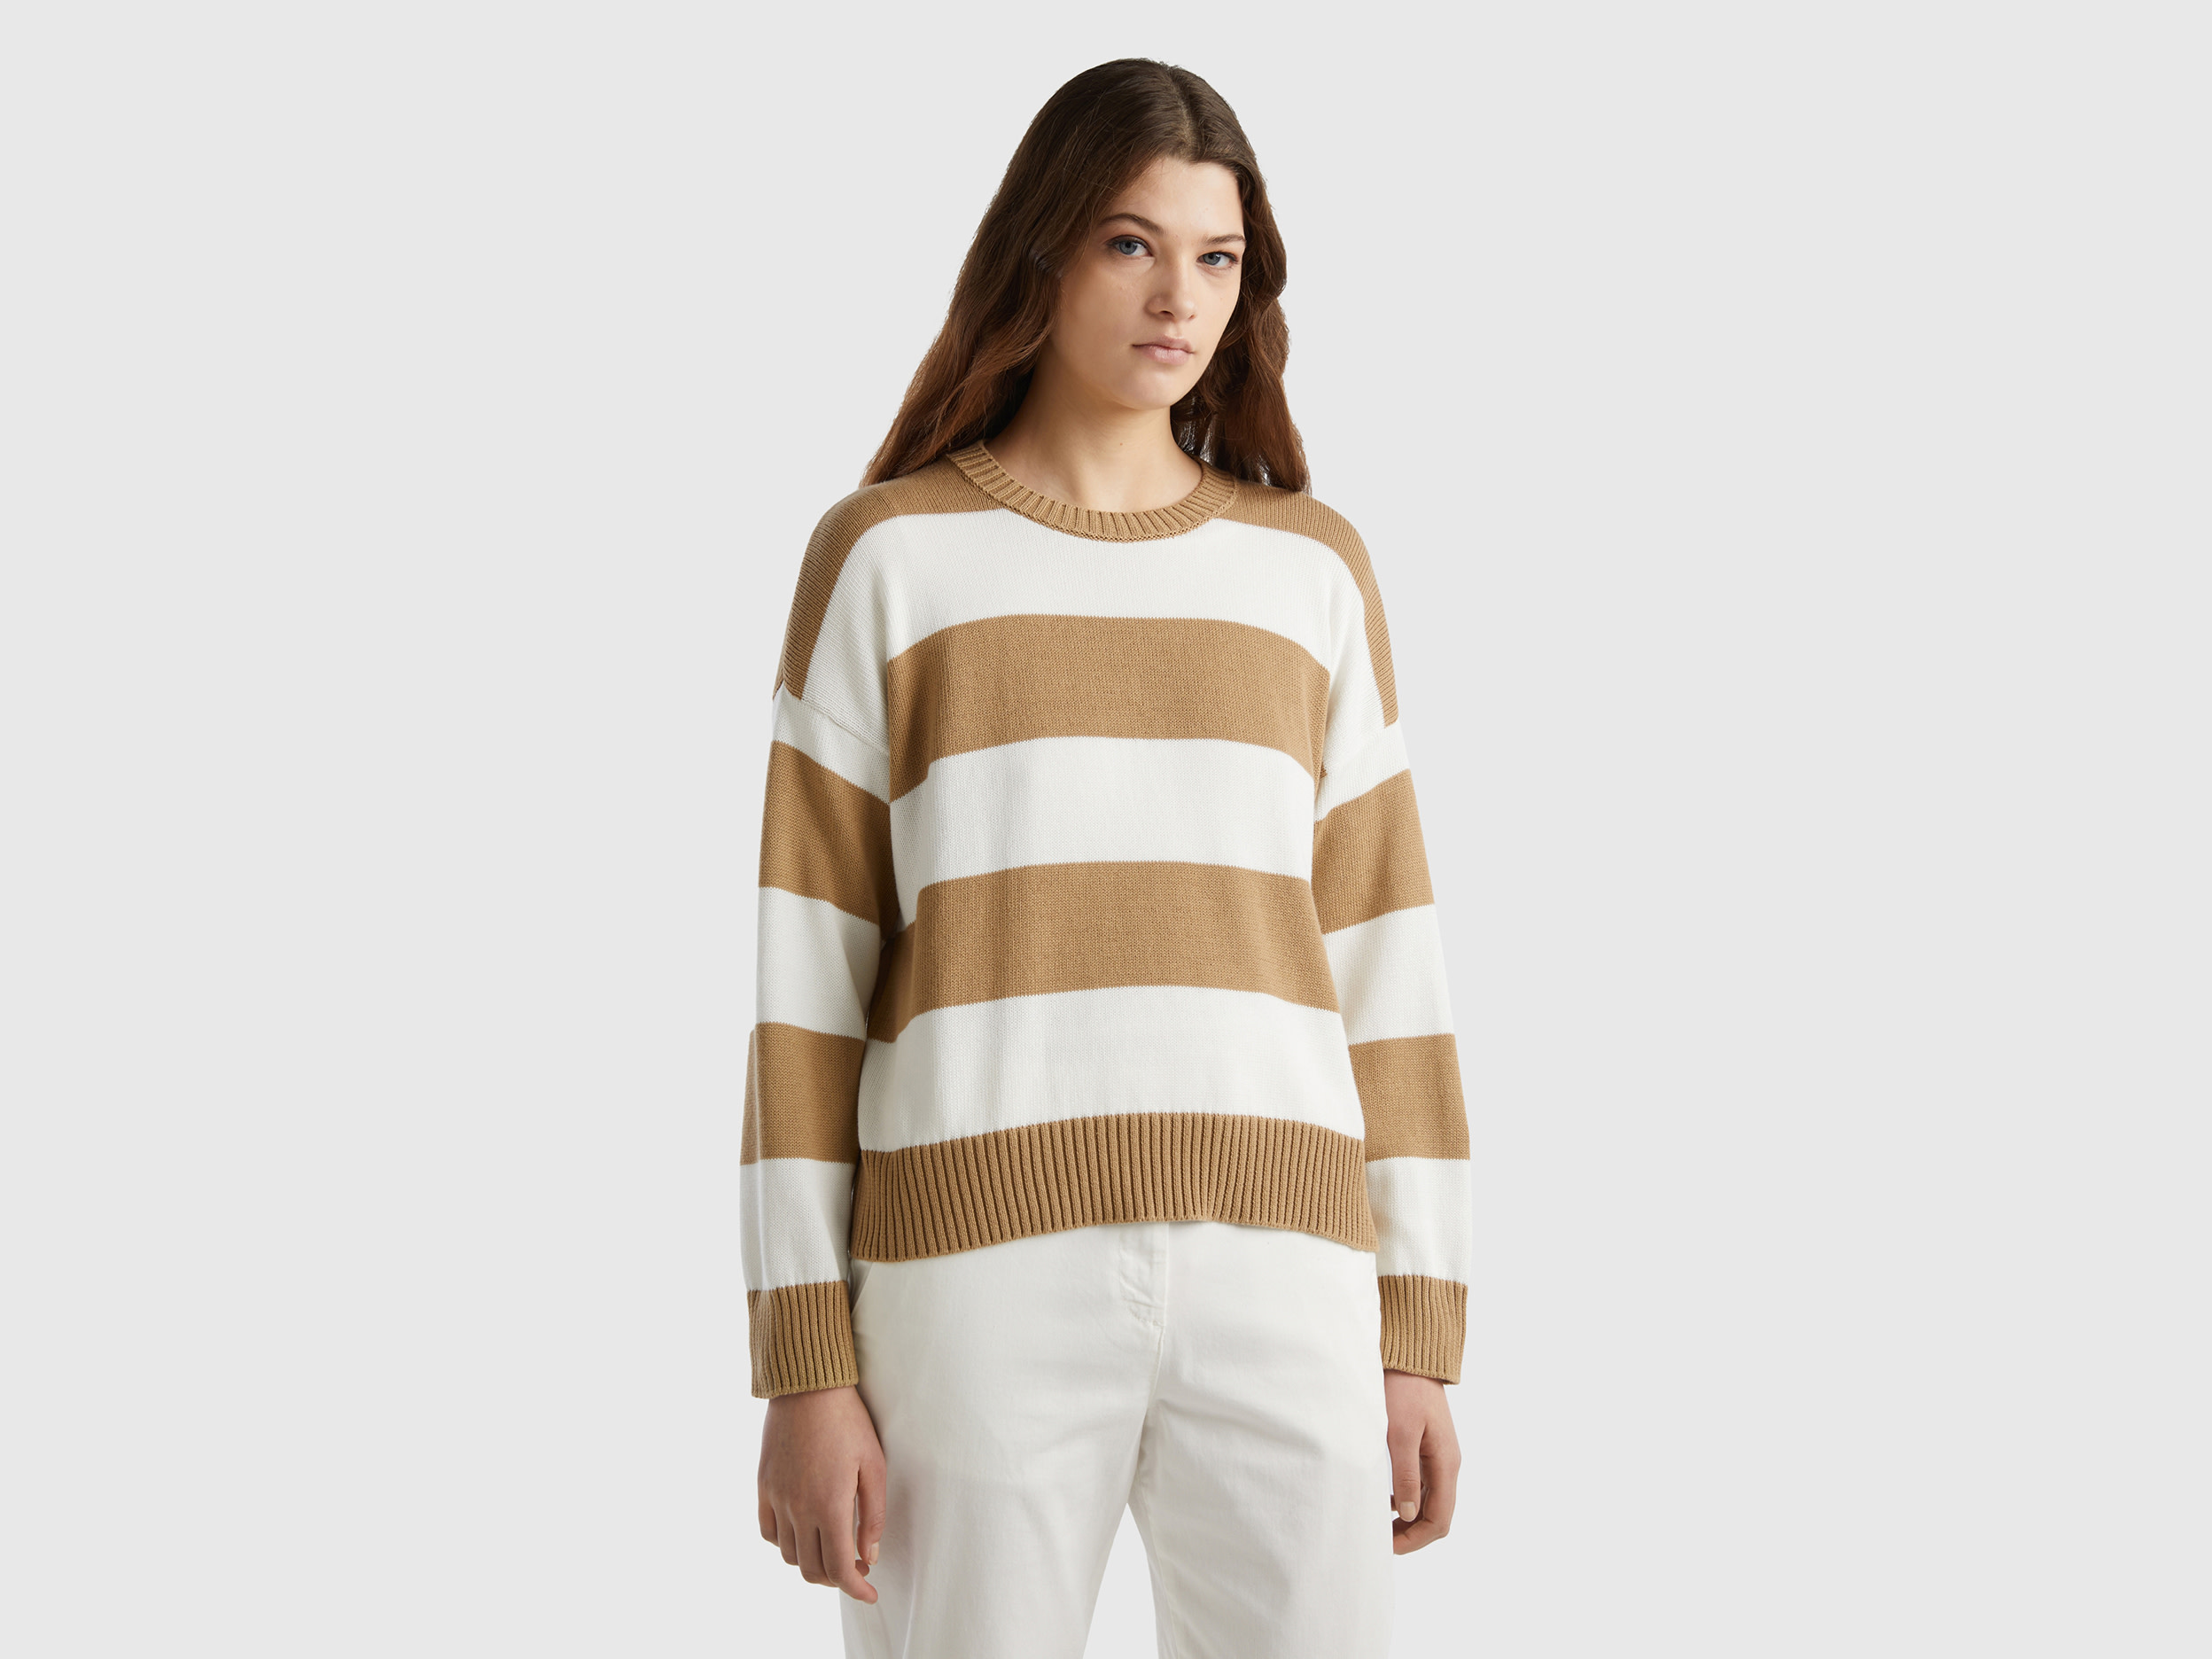 Benetton, Striped Sweater In Tricot Cotton, size S, Camel, Women